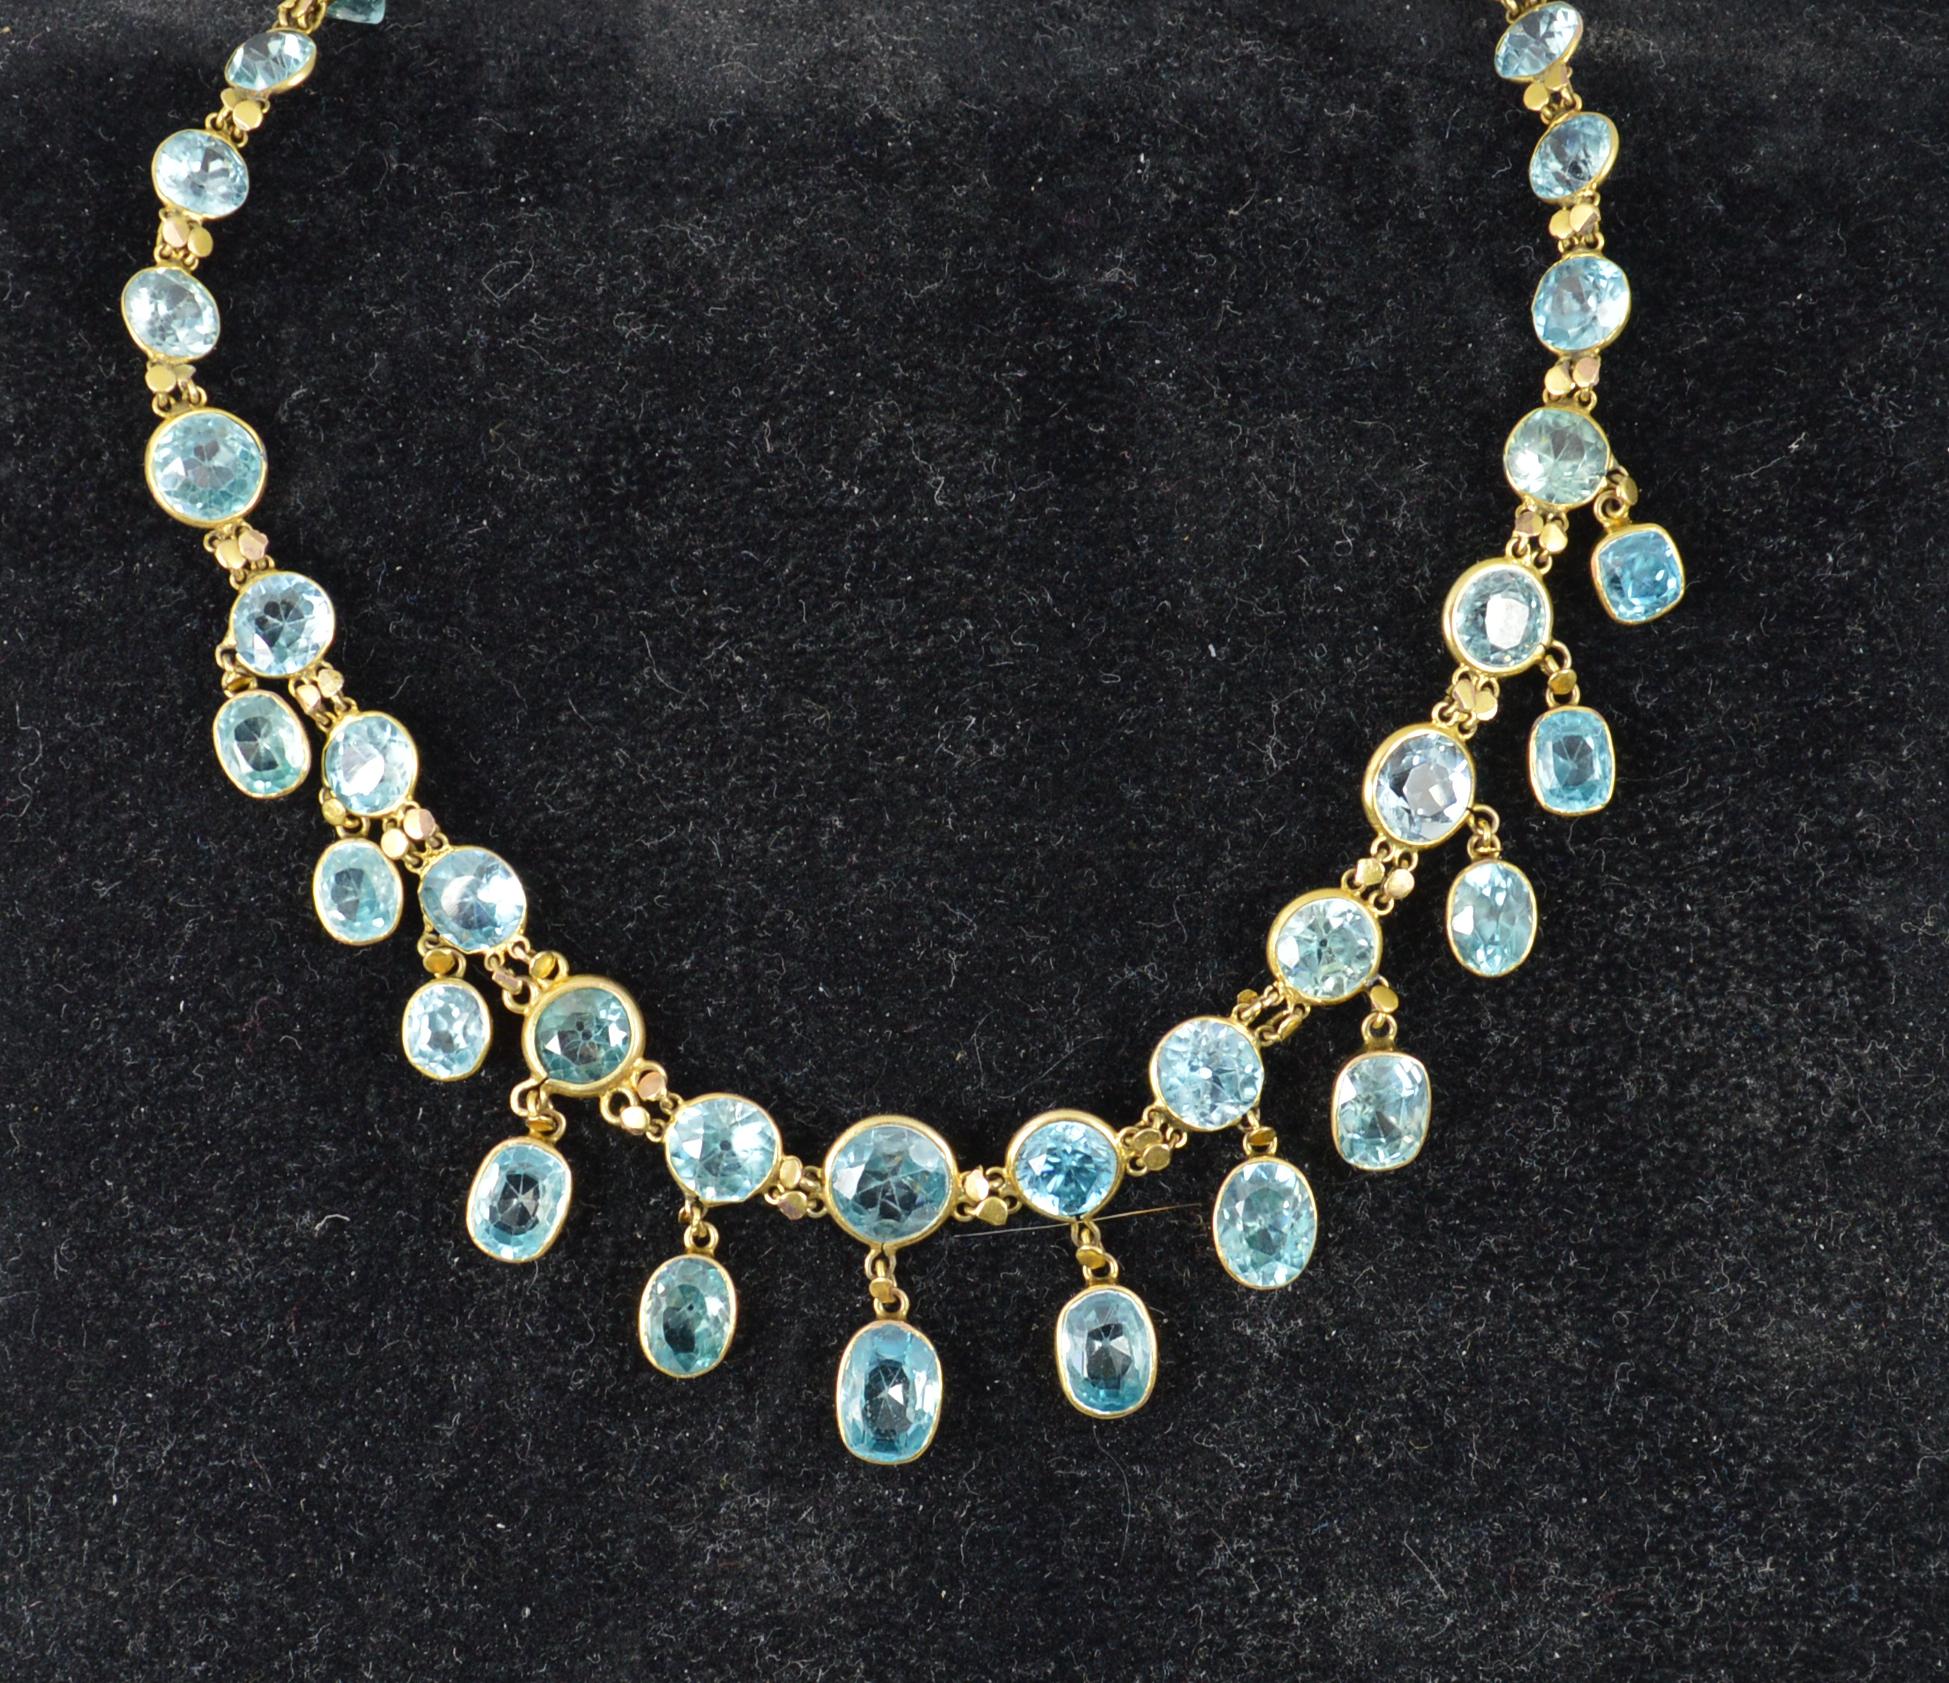 Women's or Men's Victorian 9 Carat Gold and Blue Zircon Necklace Riviere Chain